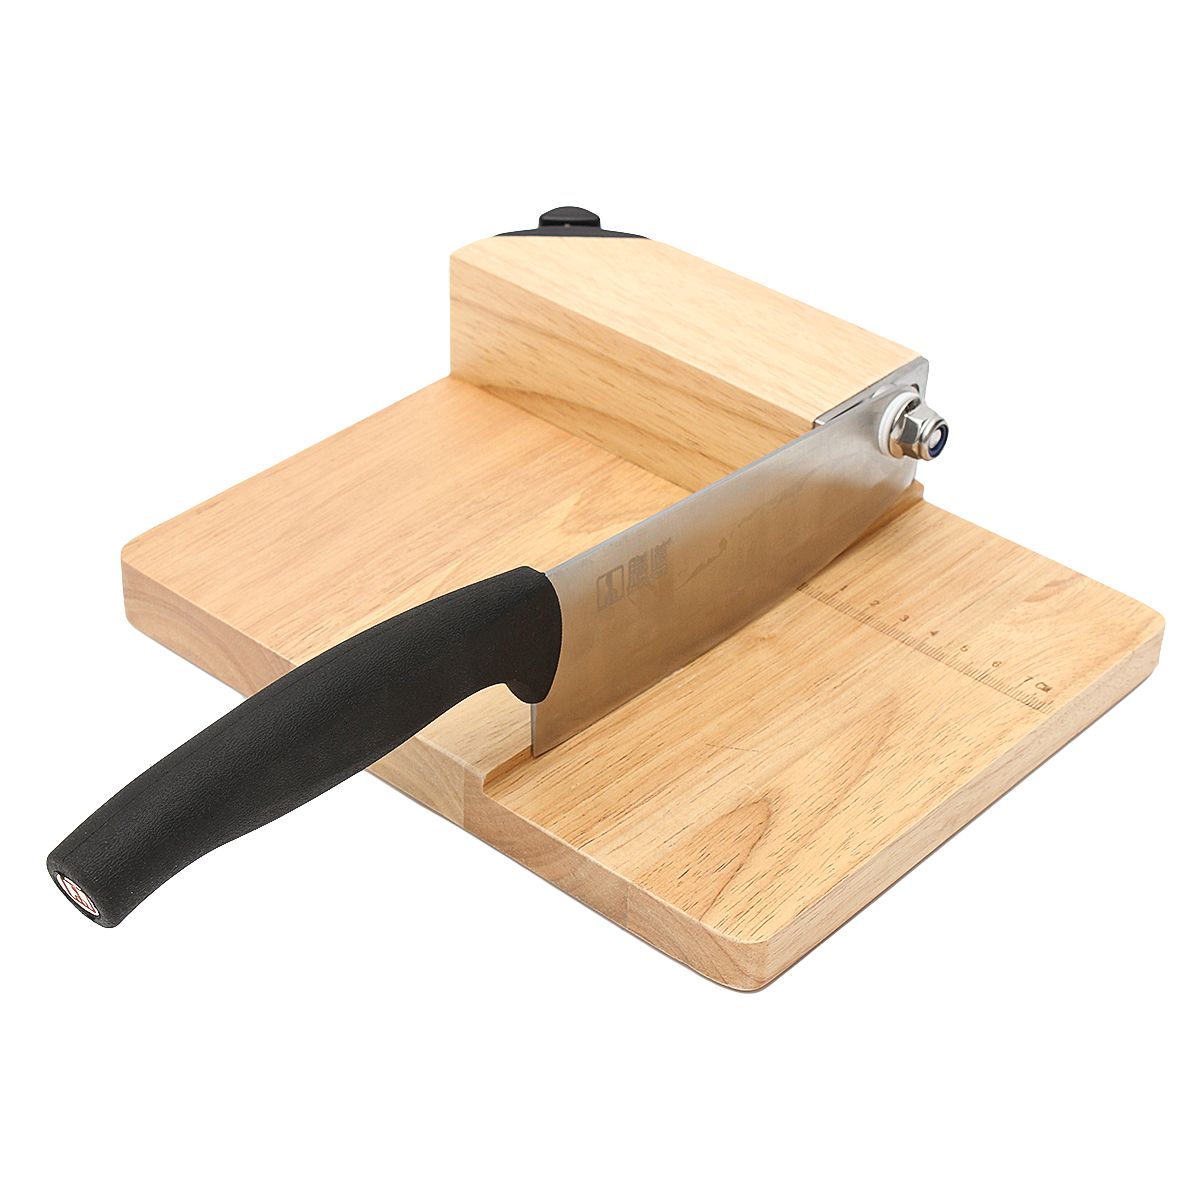 Biltong-Cutter-Jerky-Slicer-Slicer-With-Cutting-Board-1209060